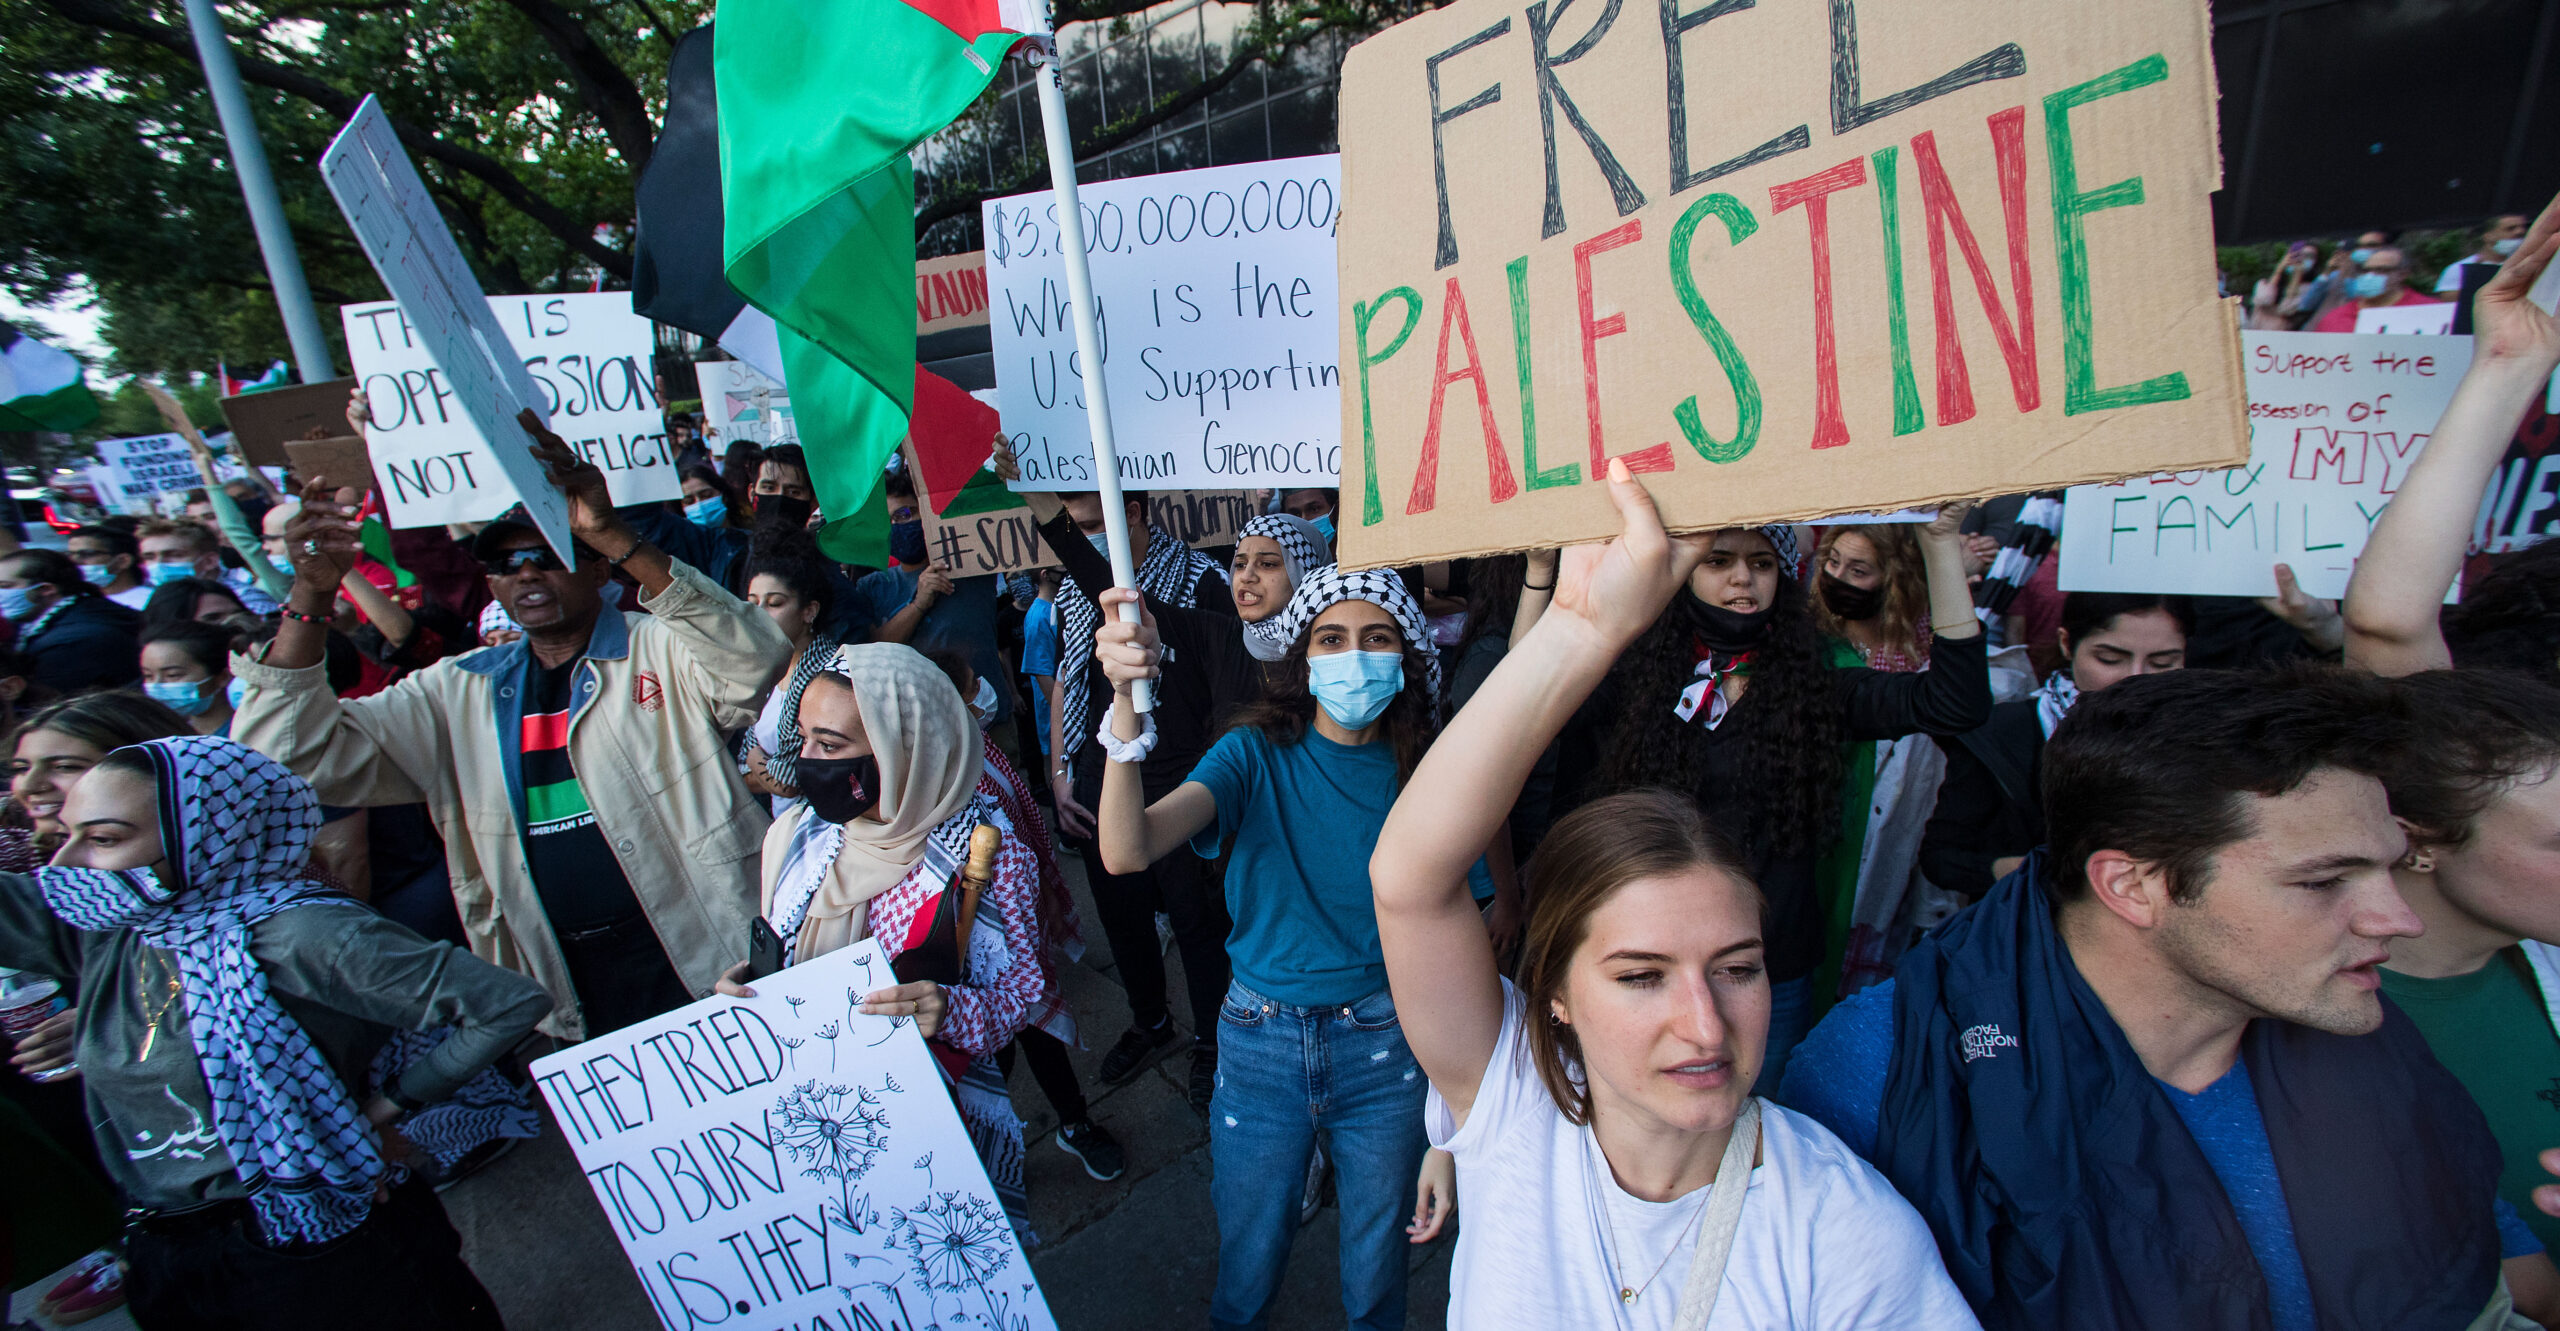 15 Reasons Liberal US Jews Shouldn't Be Shocked by Fellow Leftists' Siding With Hamas